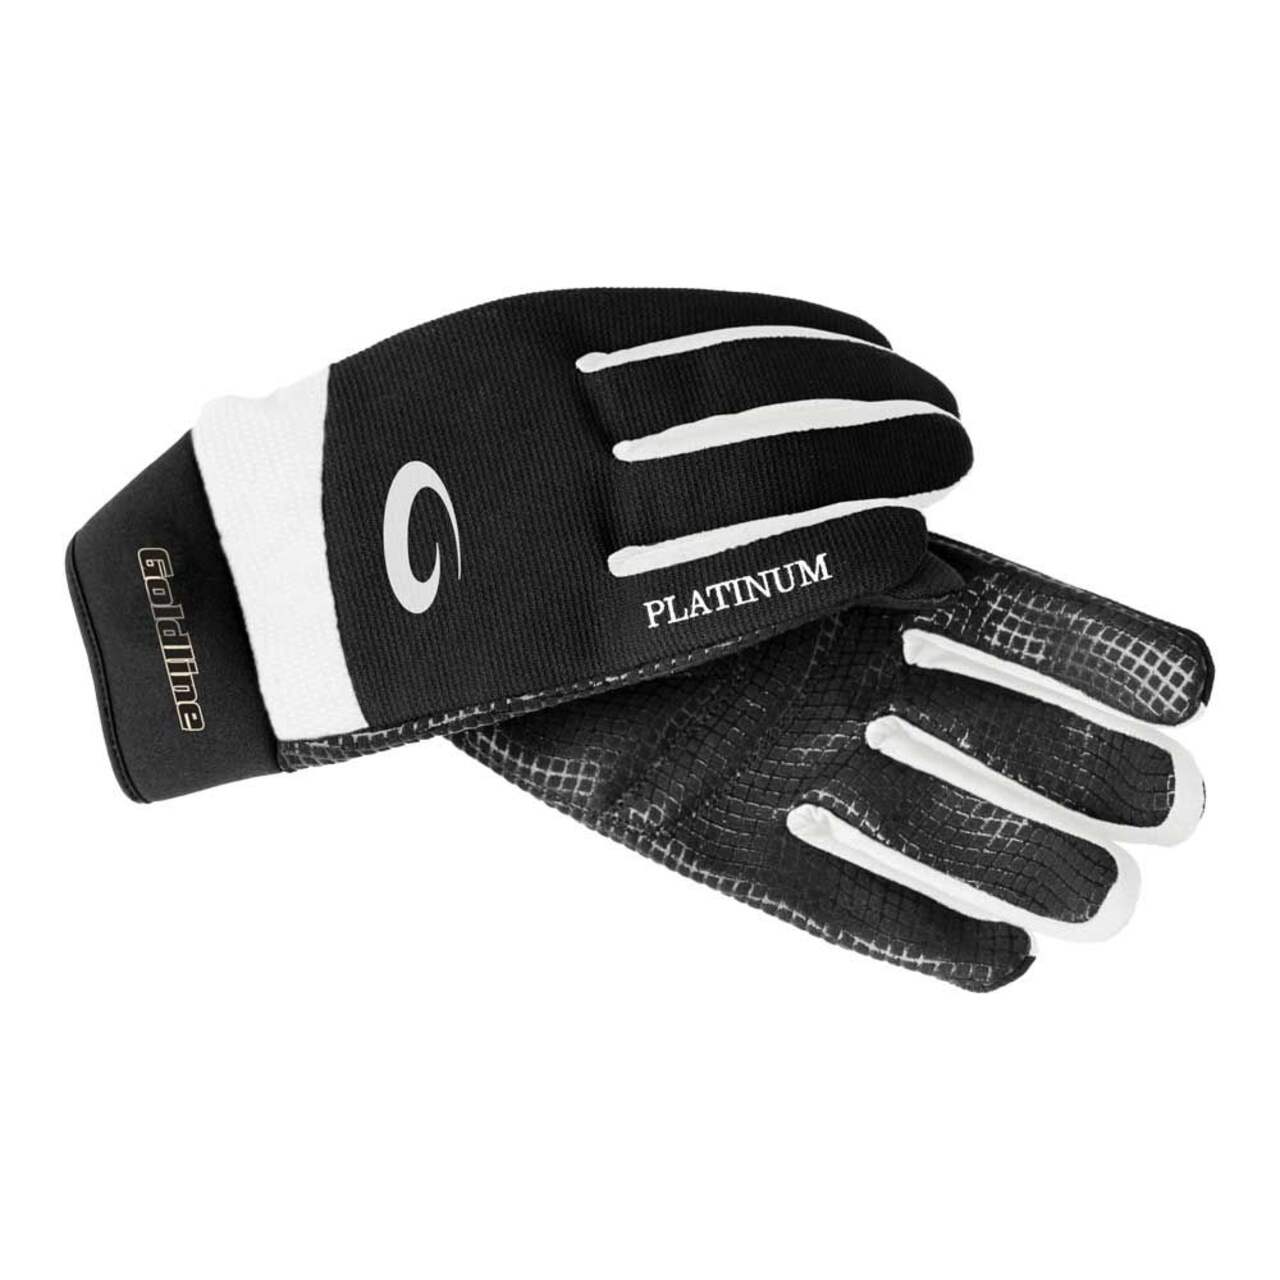 https://media-www.canadiantire.ca/product/playing/team-sports-and-golf/sports-equipment-accessories/0843143/curling-glove-extra-large-f35e1586-dbf8-4559-ba97-afe5ddd95f37-jpgrendition.jpg?imdensity=1&imwidth=640&impolicy=mZoom